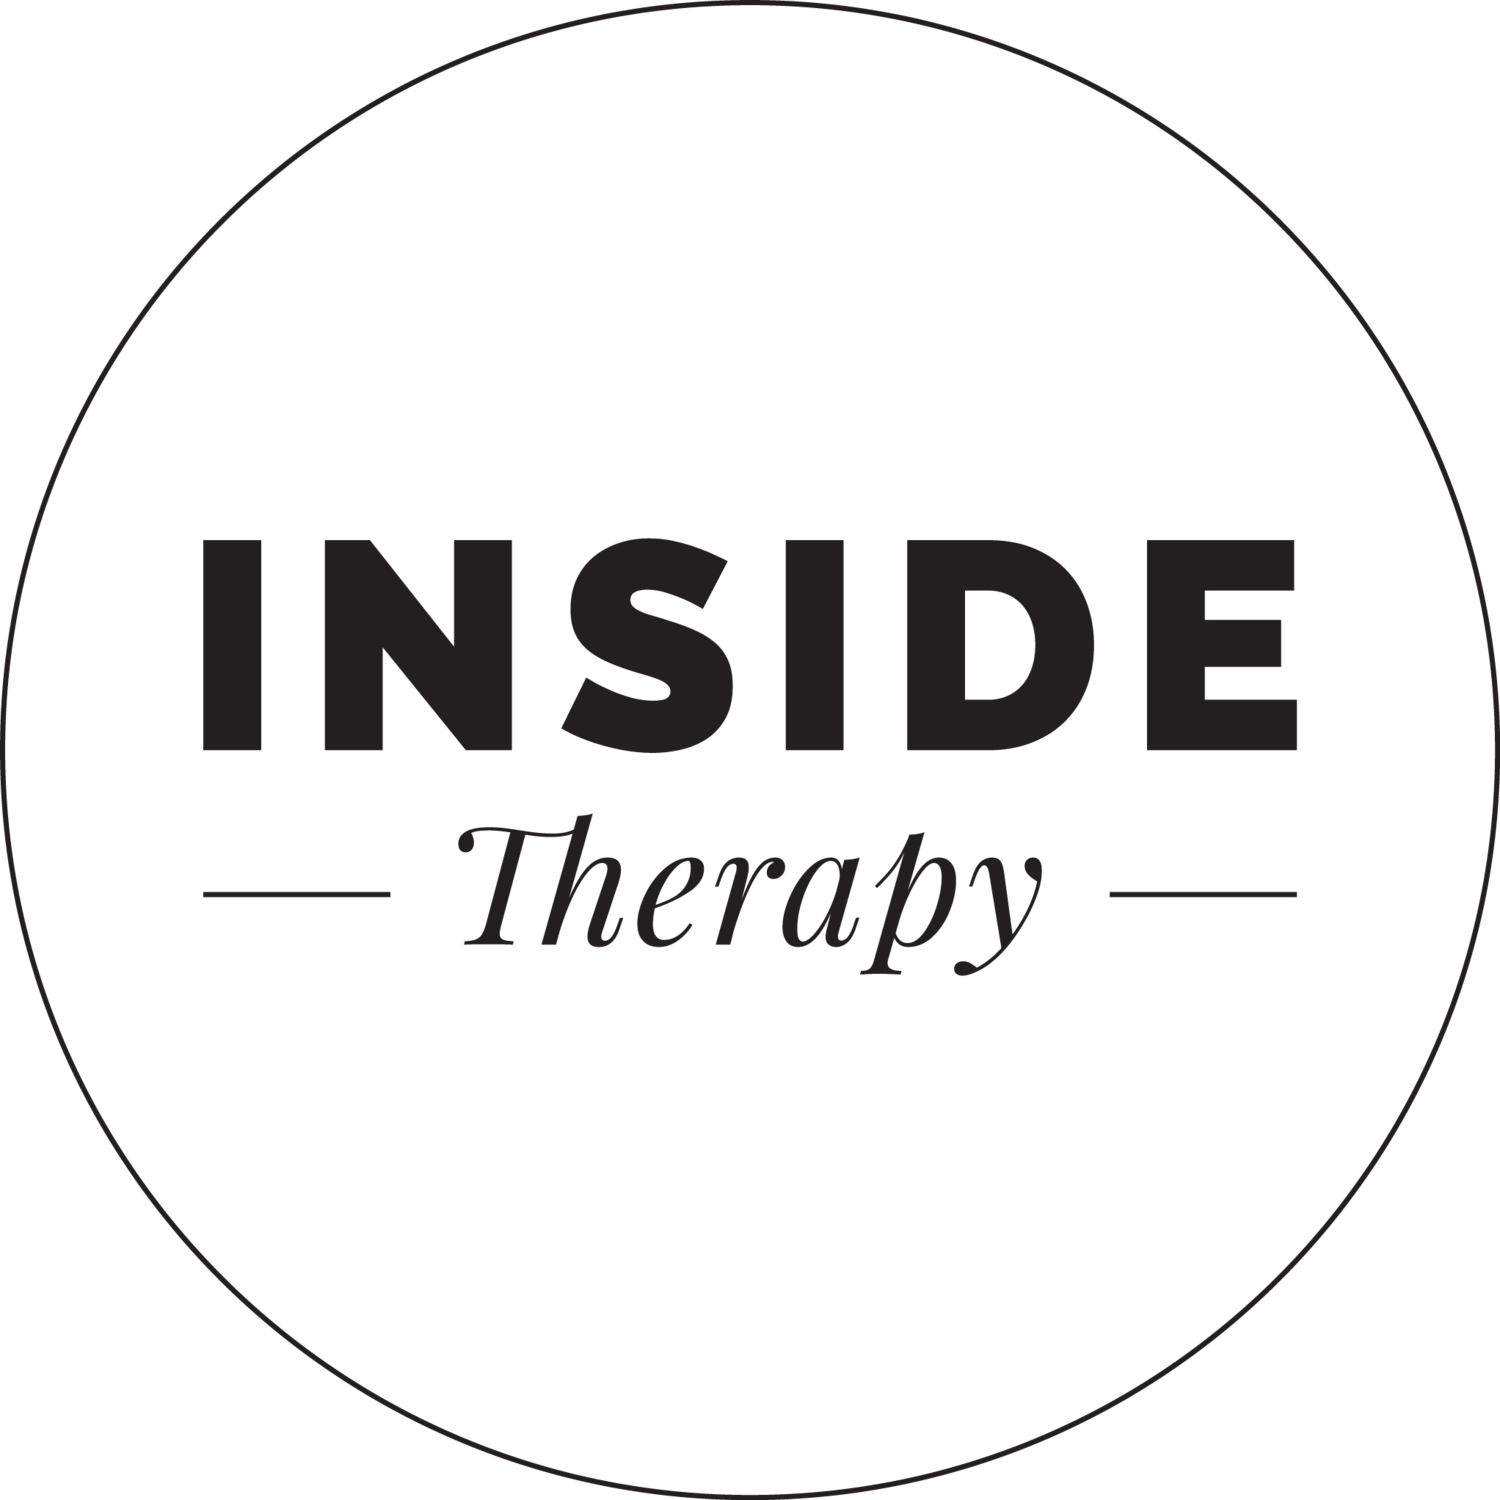 Inside Therapy